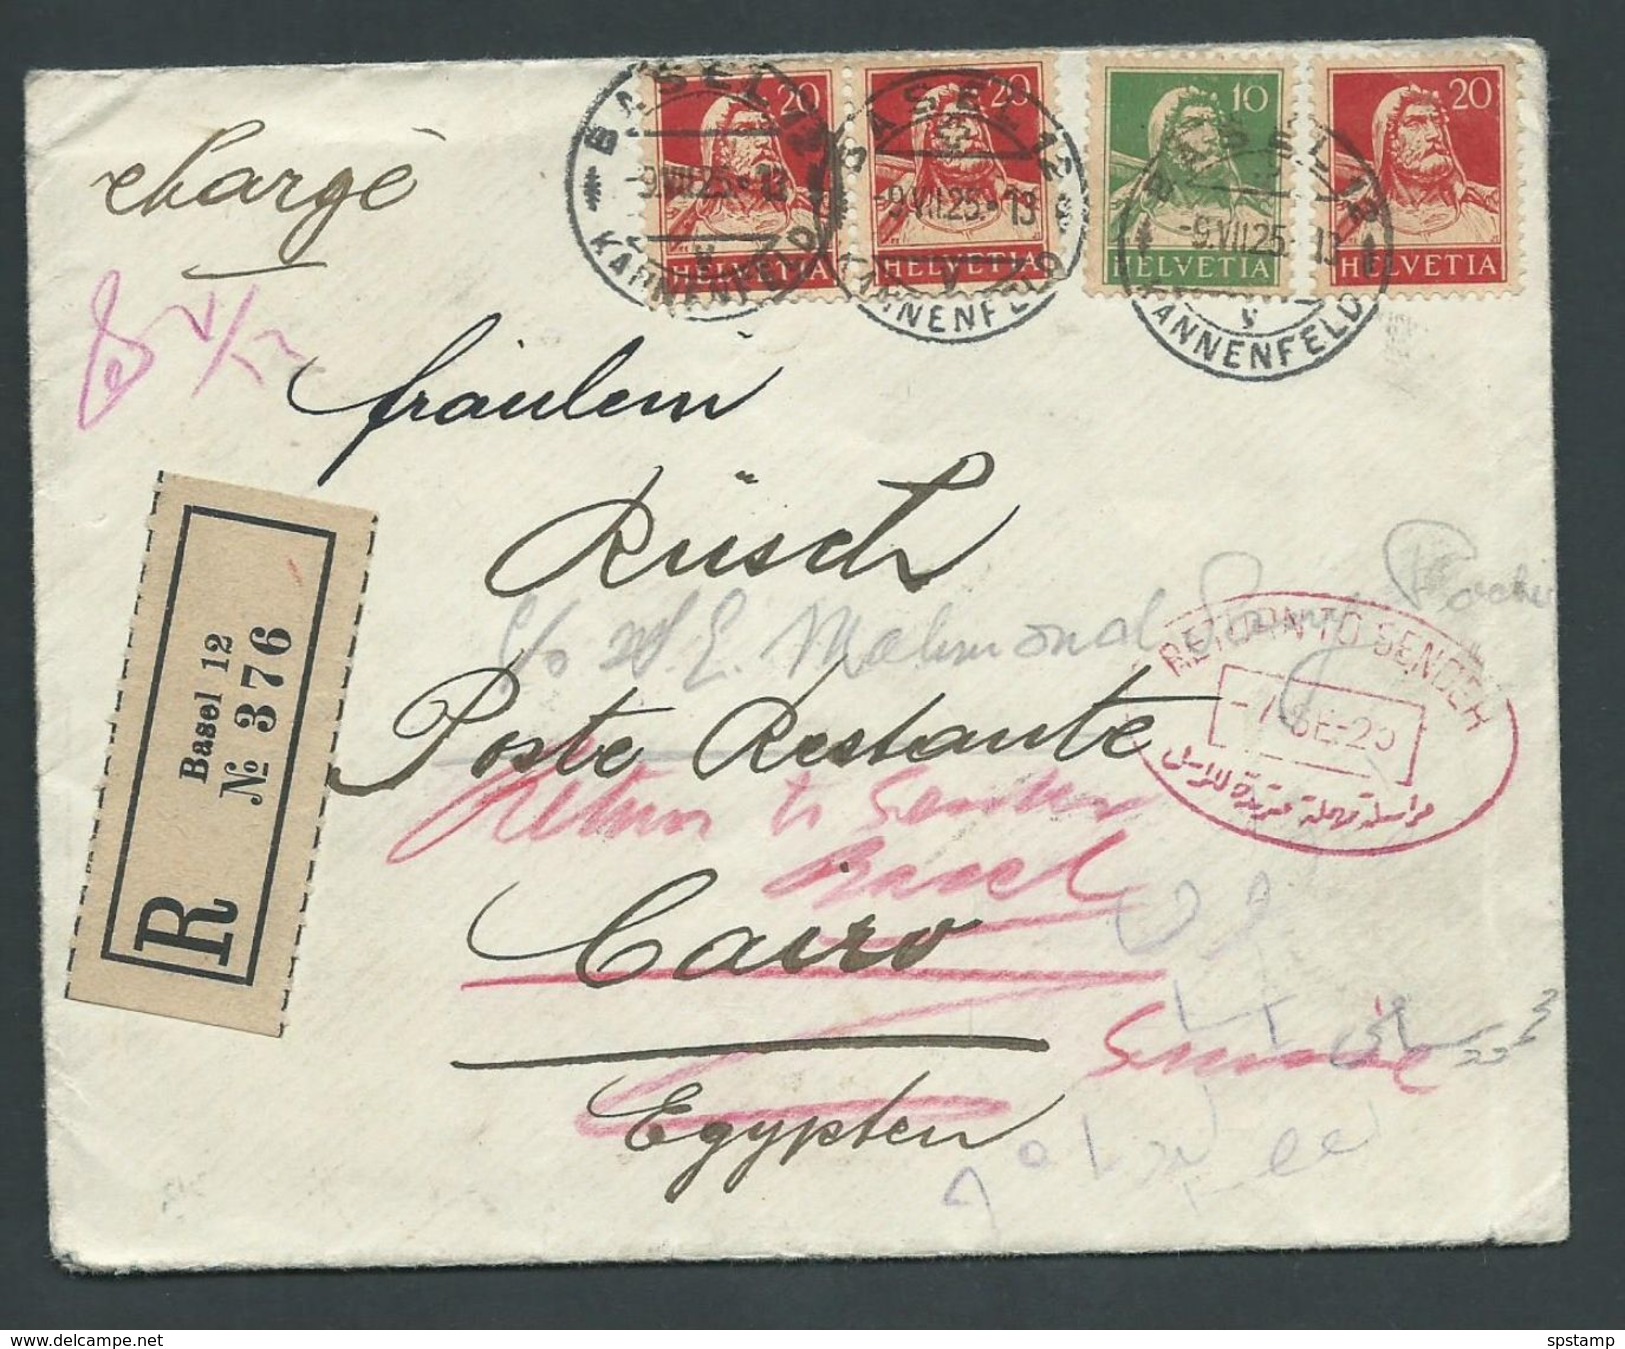 Egypt 1925 Registered Inward But Undelivered And Returned Cover From Basel Switzerland, Full Contents Within - Covers & Documents